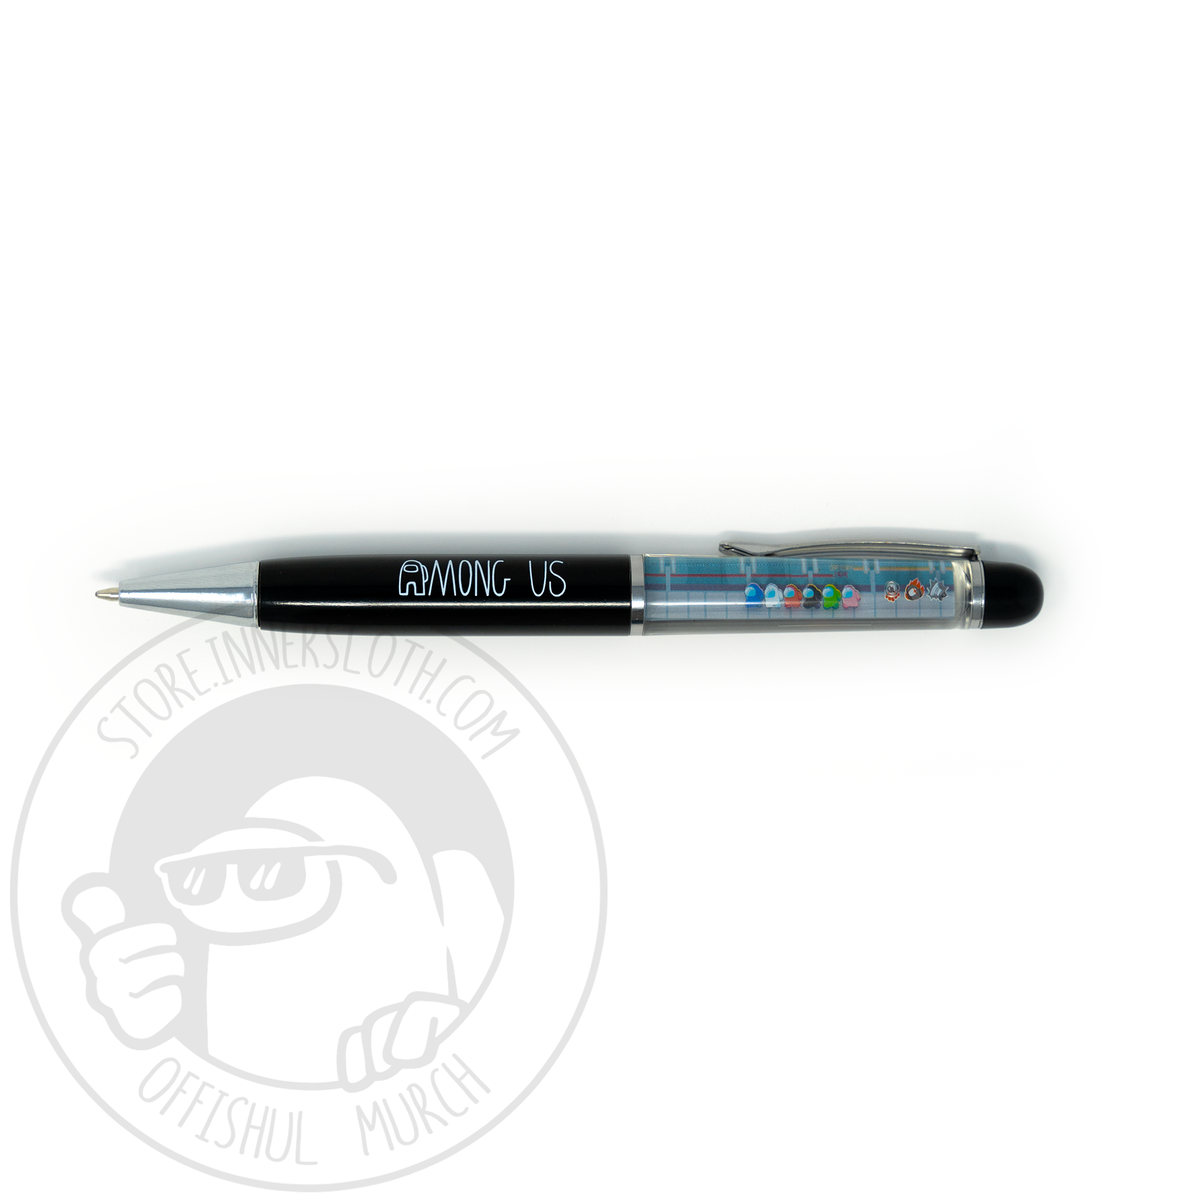 The front view of the clear tube features a line of Crewmates suspended in the mineral oil liquid. The bottom of the pen says &quot;Among Us&quot; 